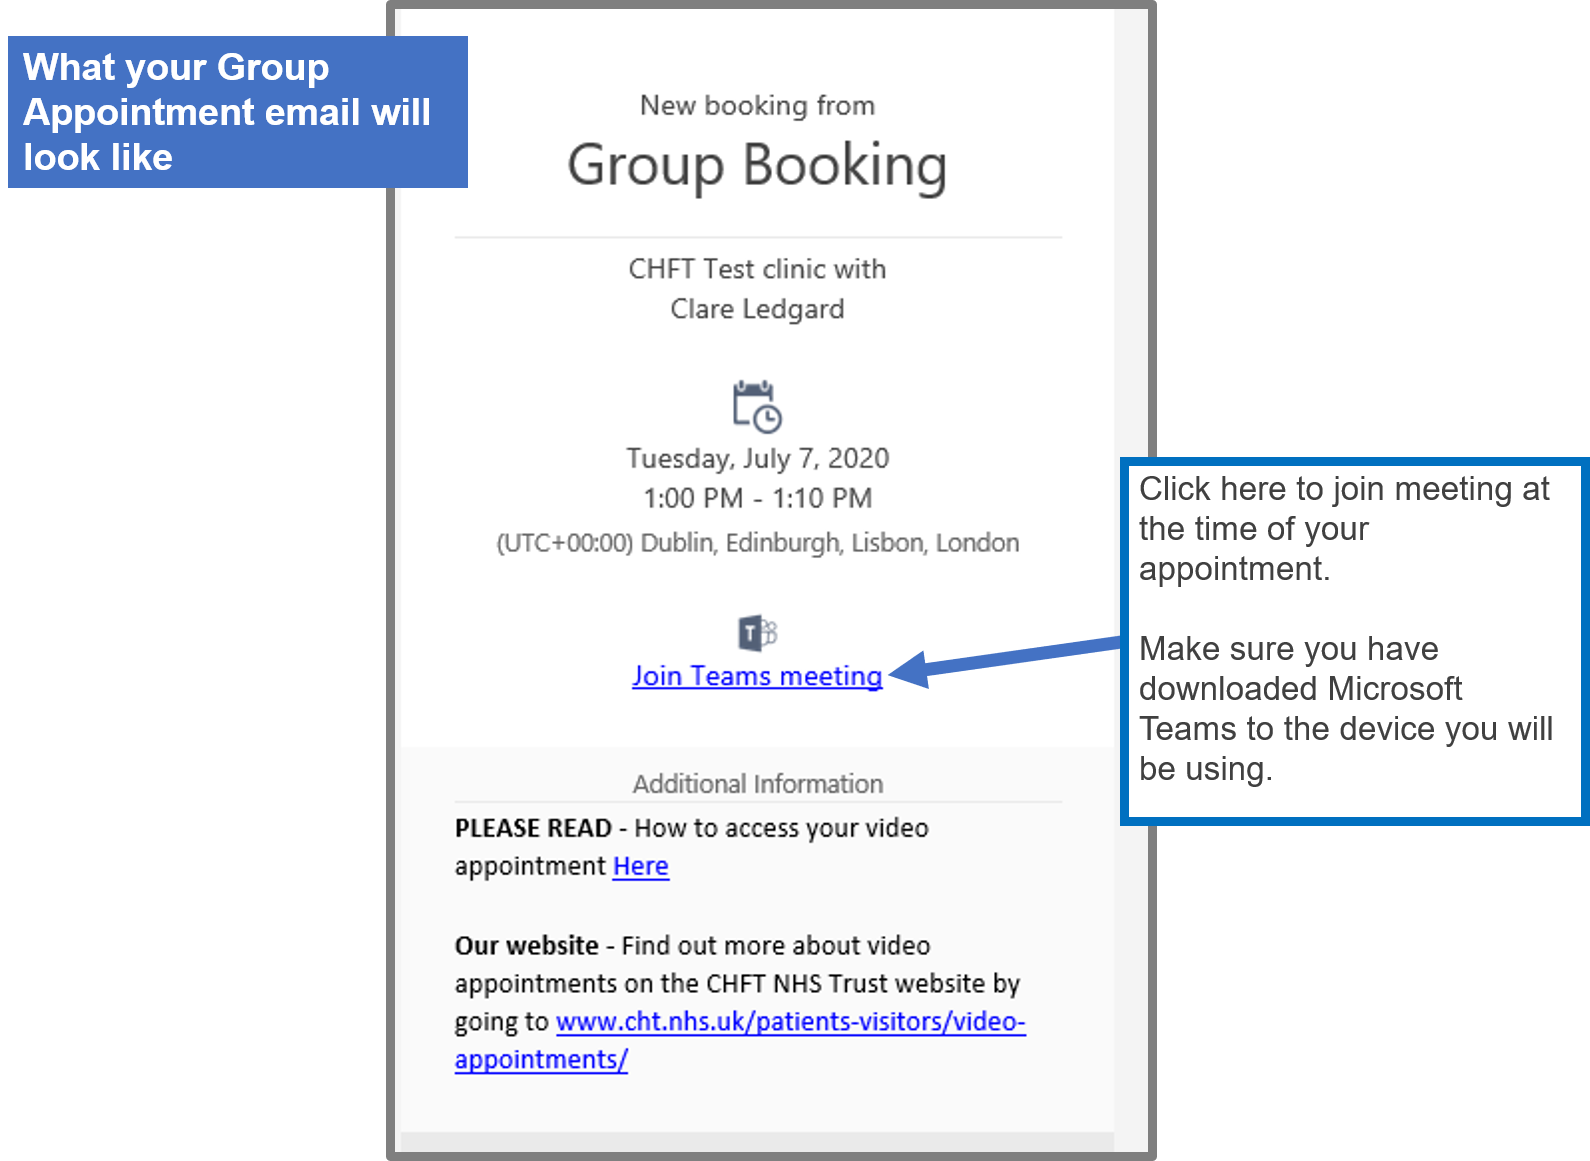 An example Group Video Appointment Email